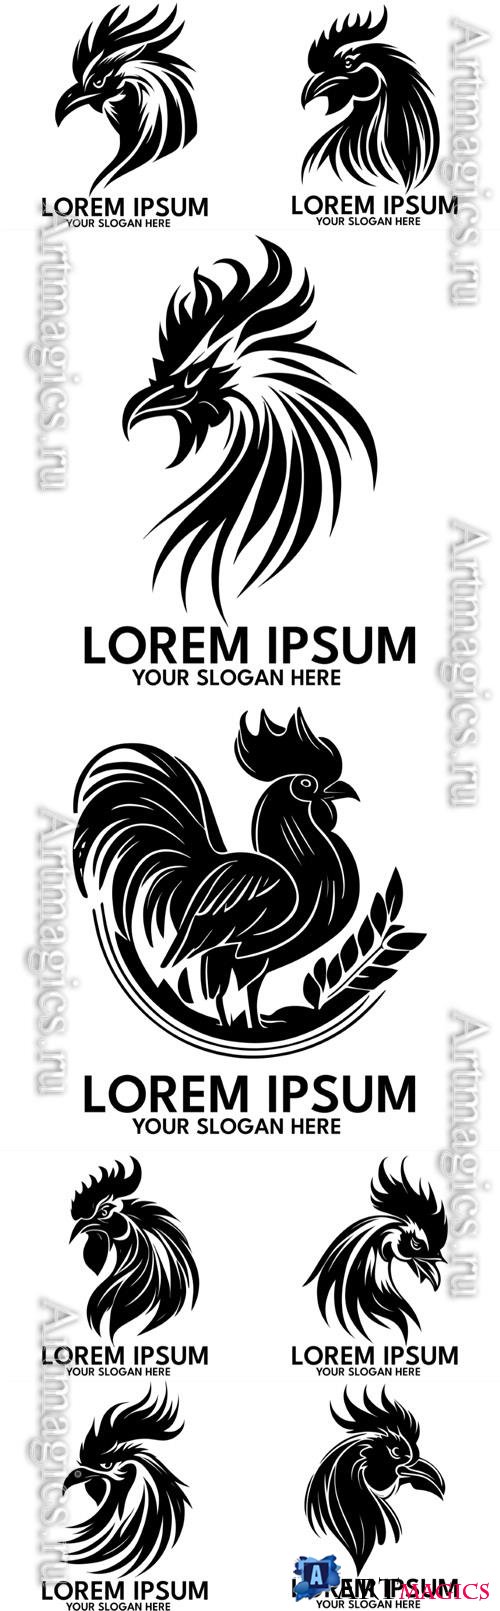 Rooster silhouette logo style vector illustration